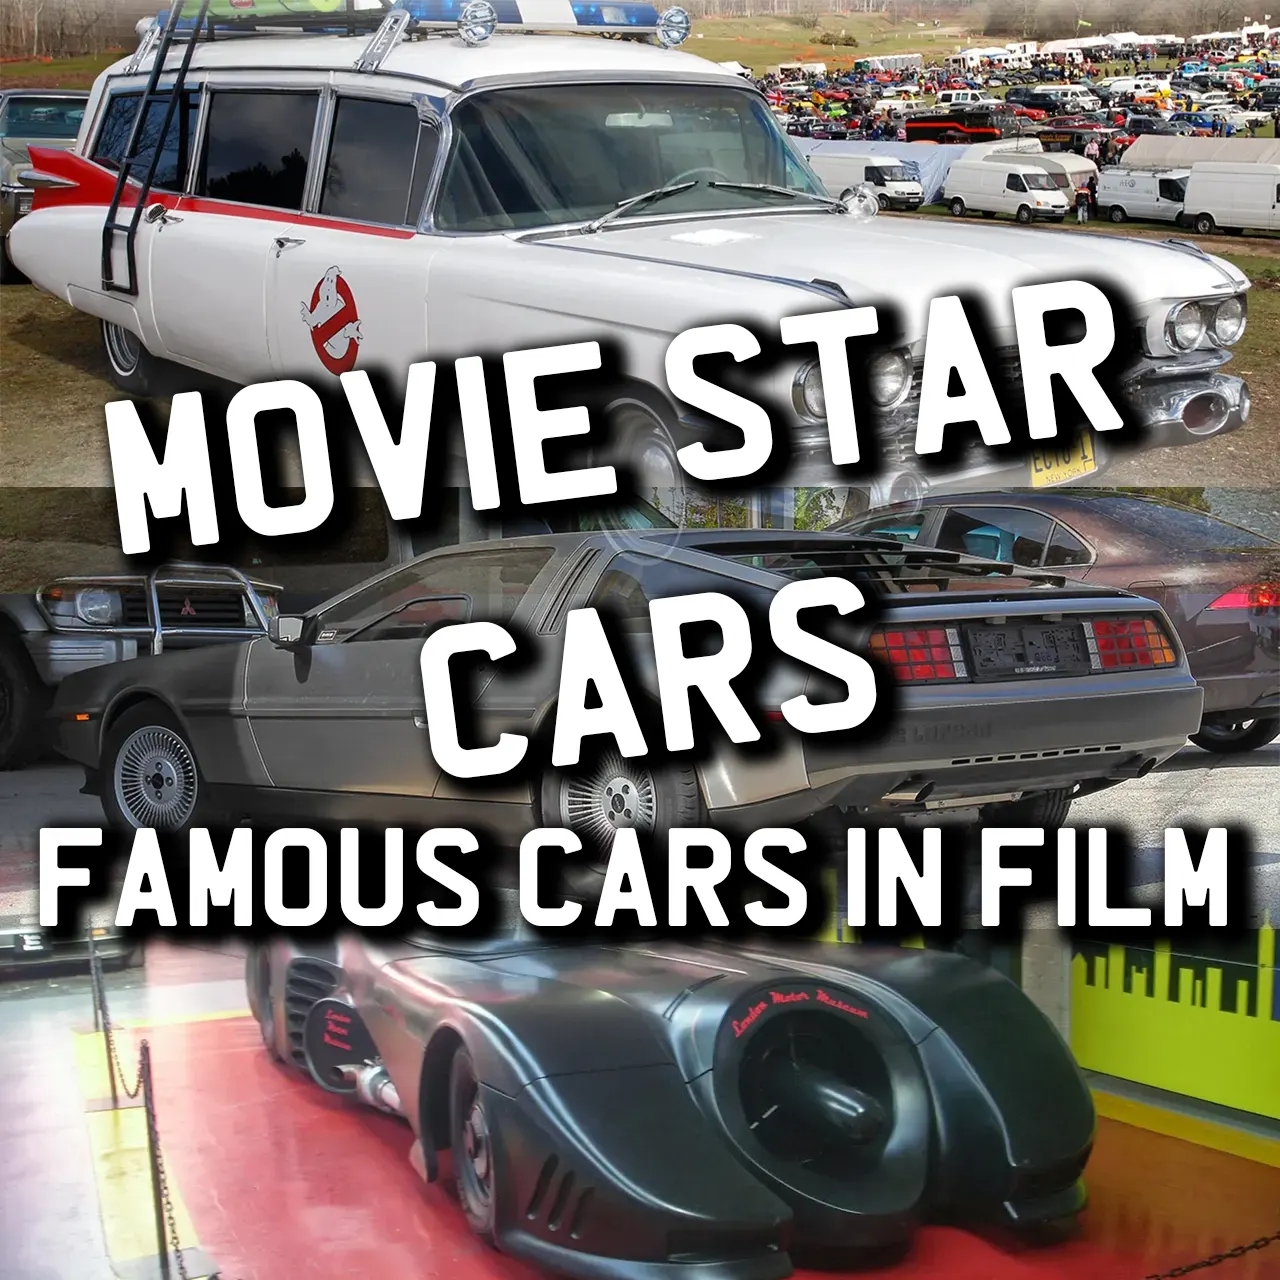 Movie Star Cars - Famous Cars In Film